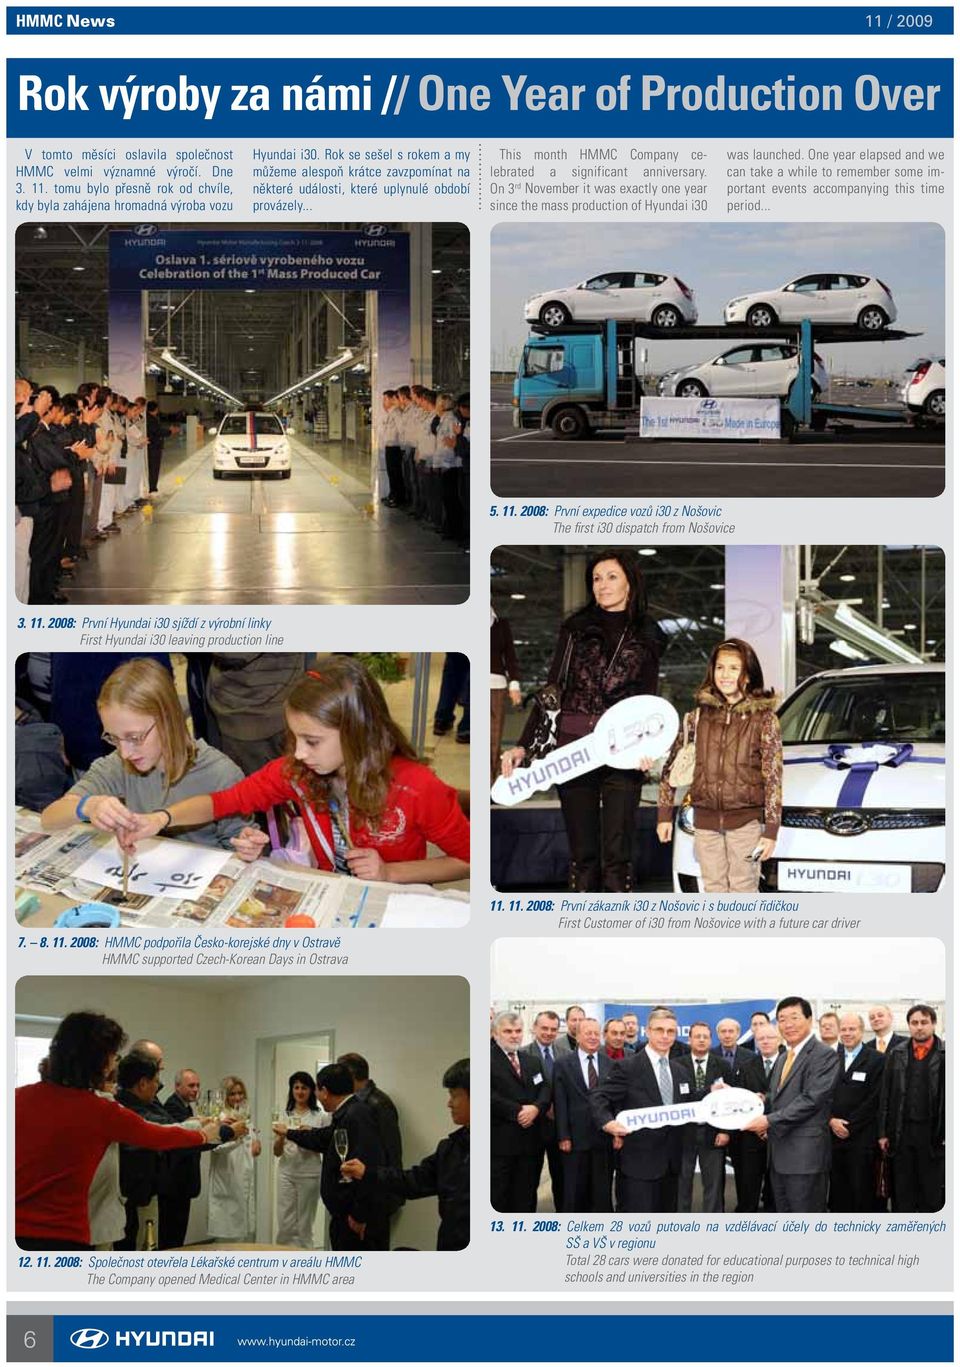 .. This month HMMC Company celebrated a significant anniversary. On 3 rd November it was exactly one year since the mass production of Hyundai i30 was launched.